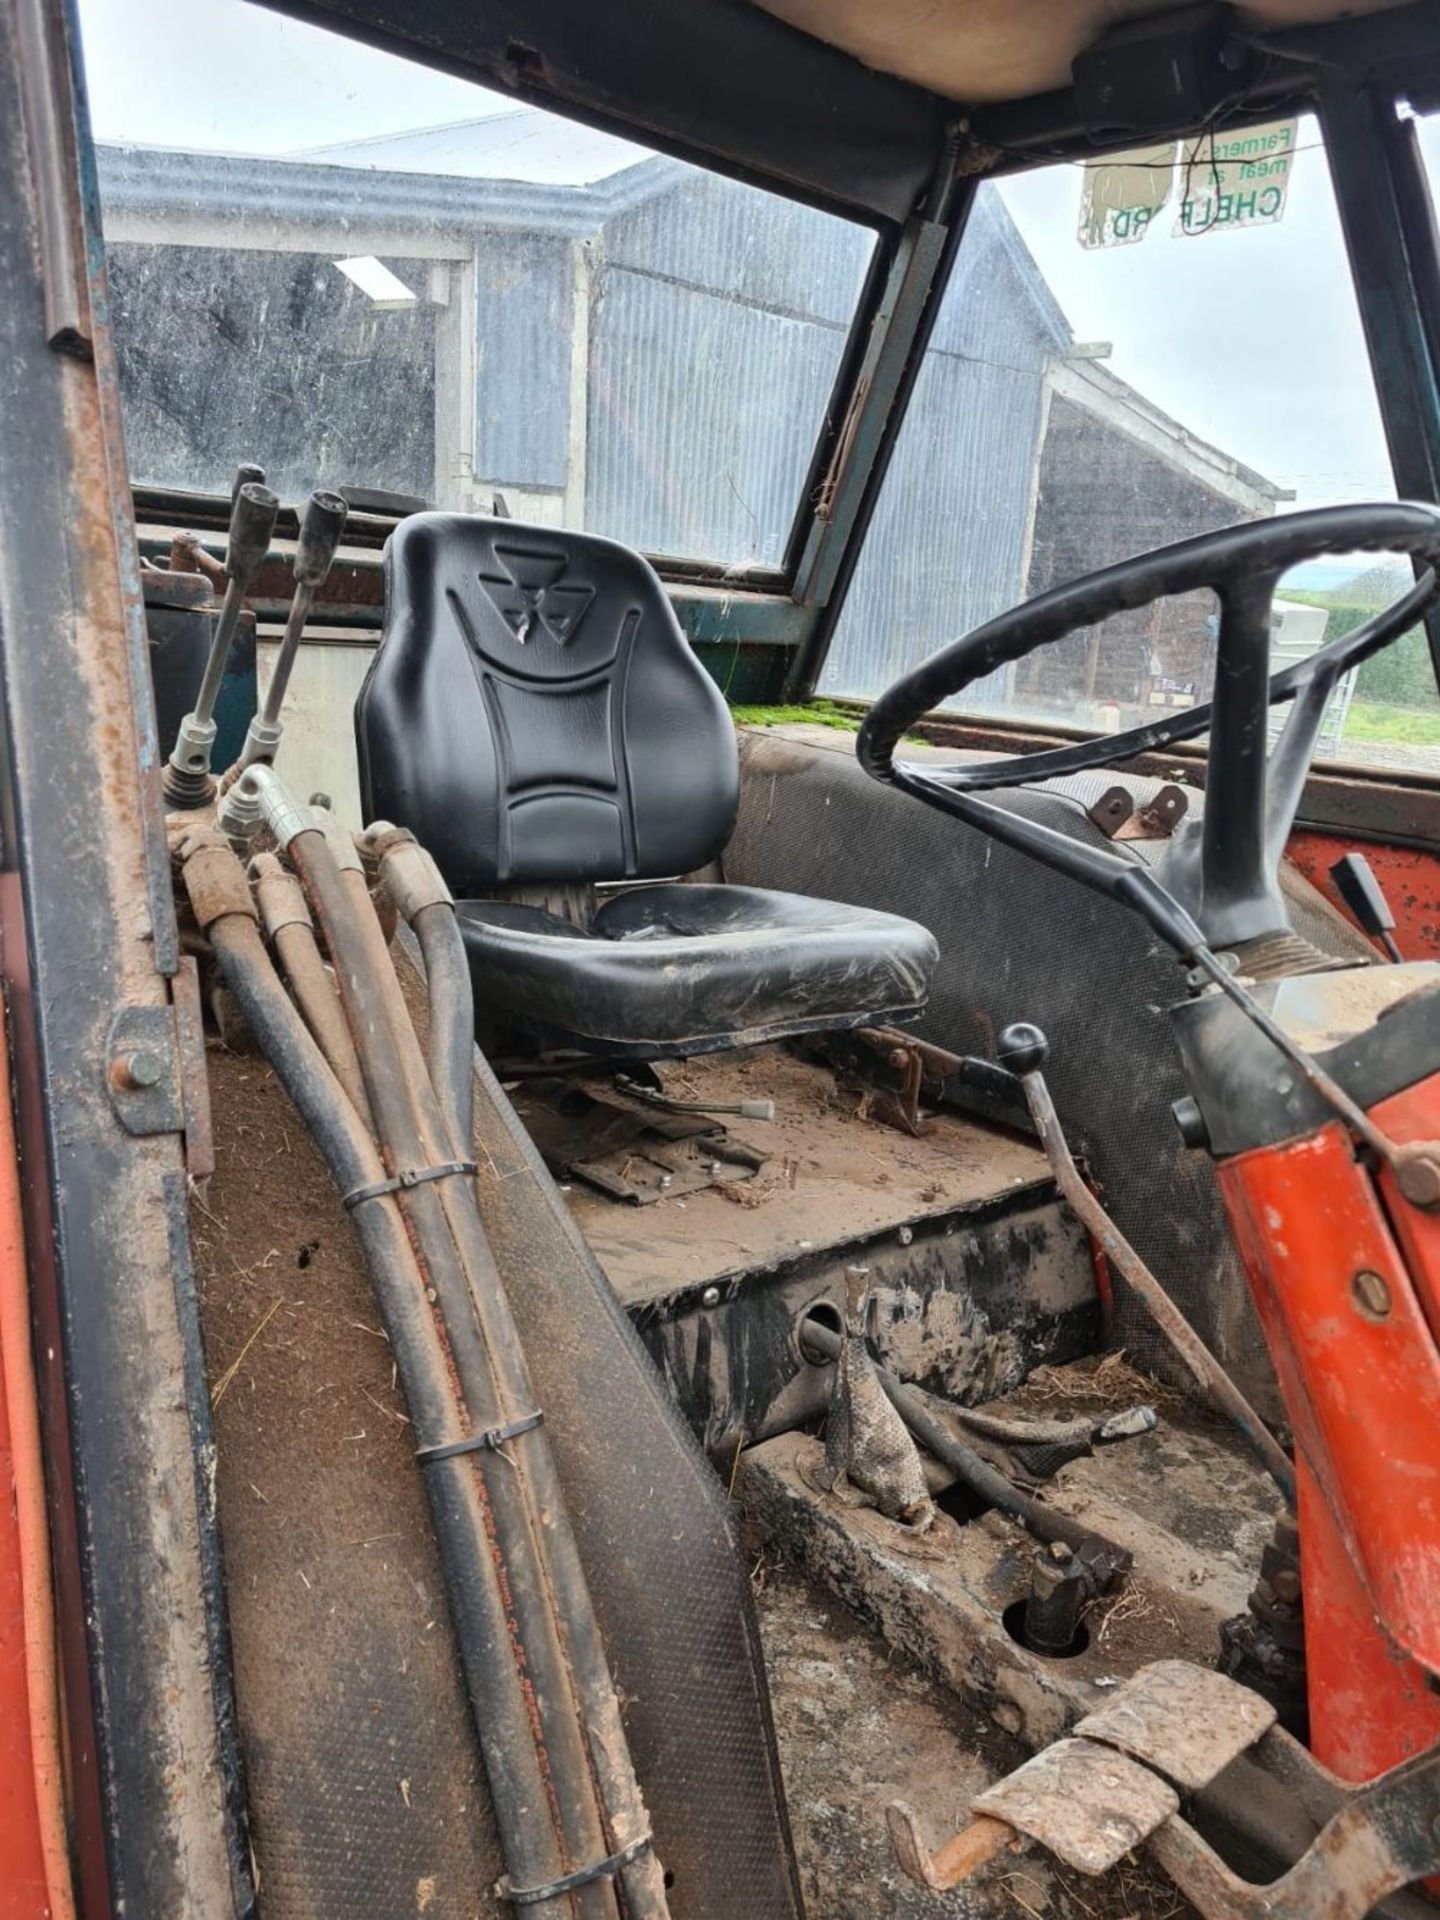 ZETOR SOIL TRACTOR, VERY TIDY CONDITION - Image 4 of 7